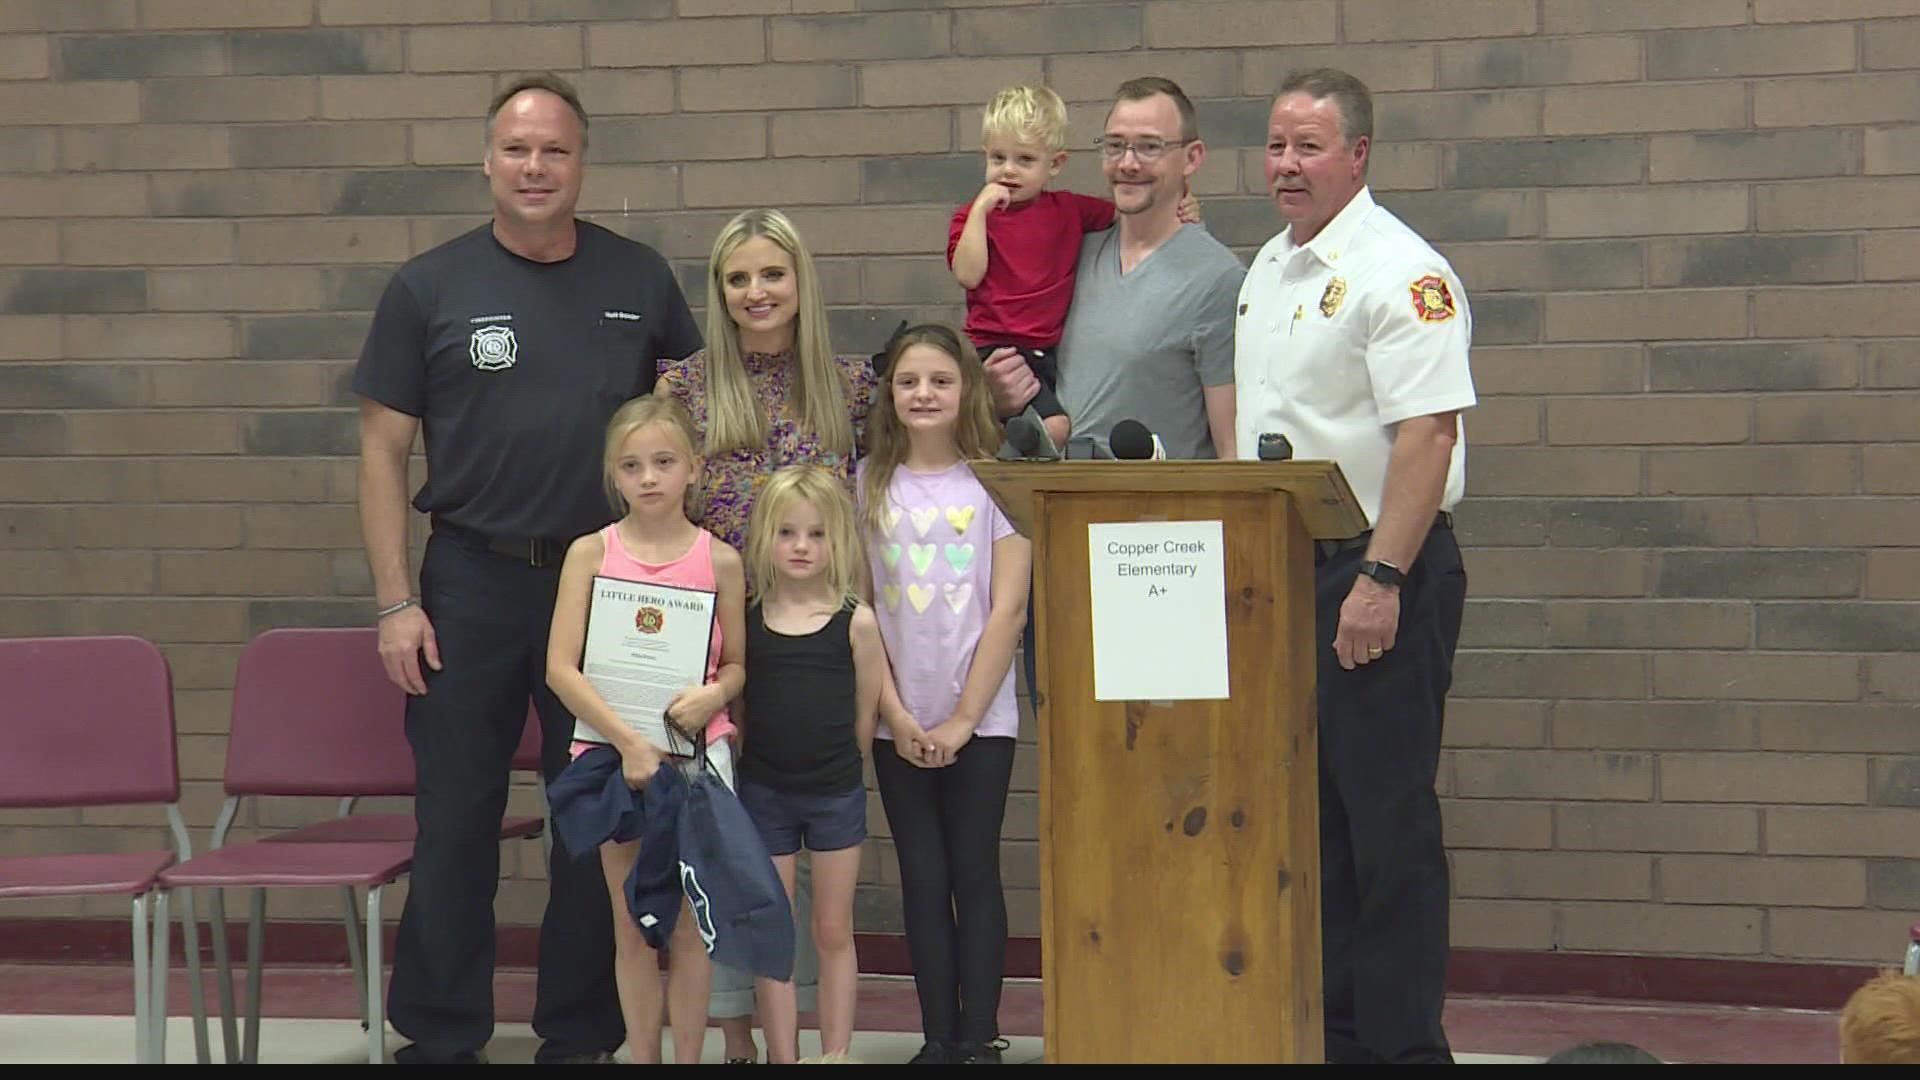 A Valley 9-year-old was honored by the Glendale Fire Department Wednesday for saving her family from a house fire back in February.